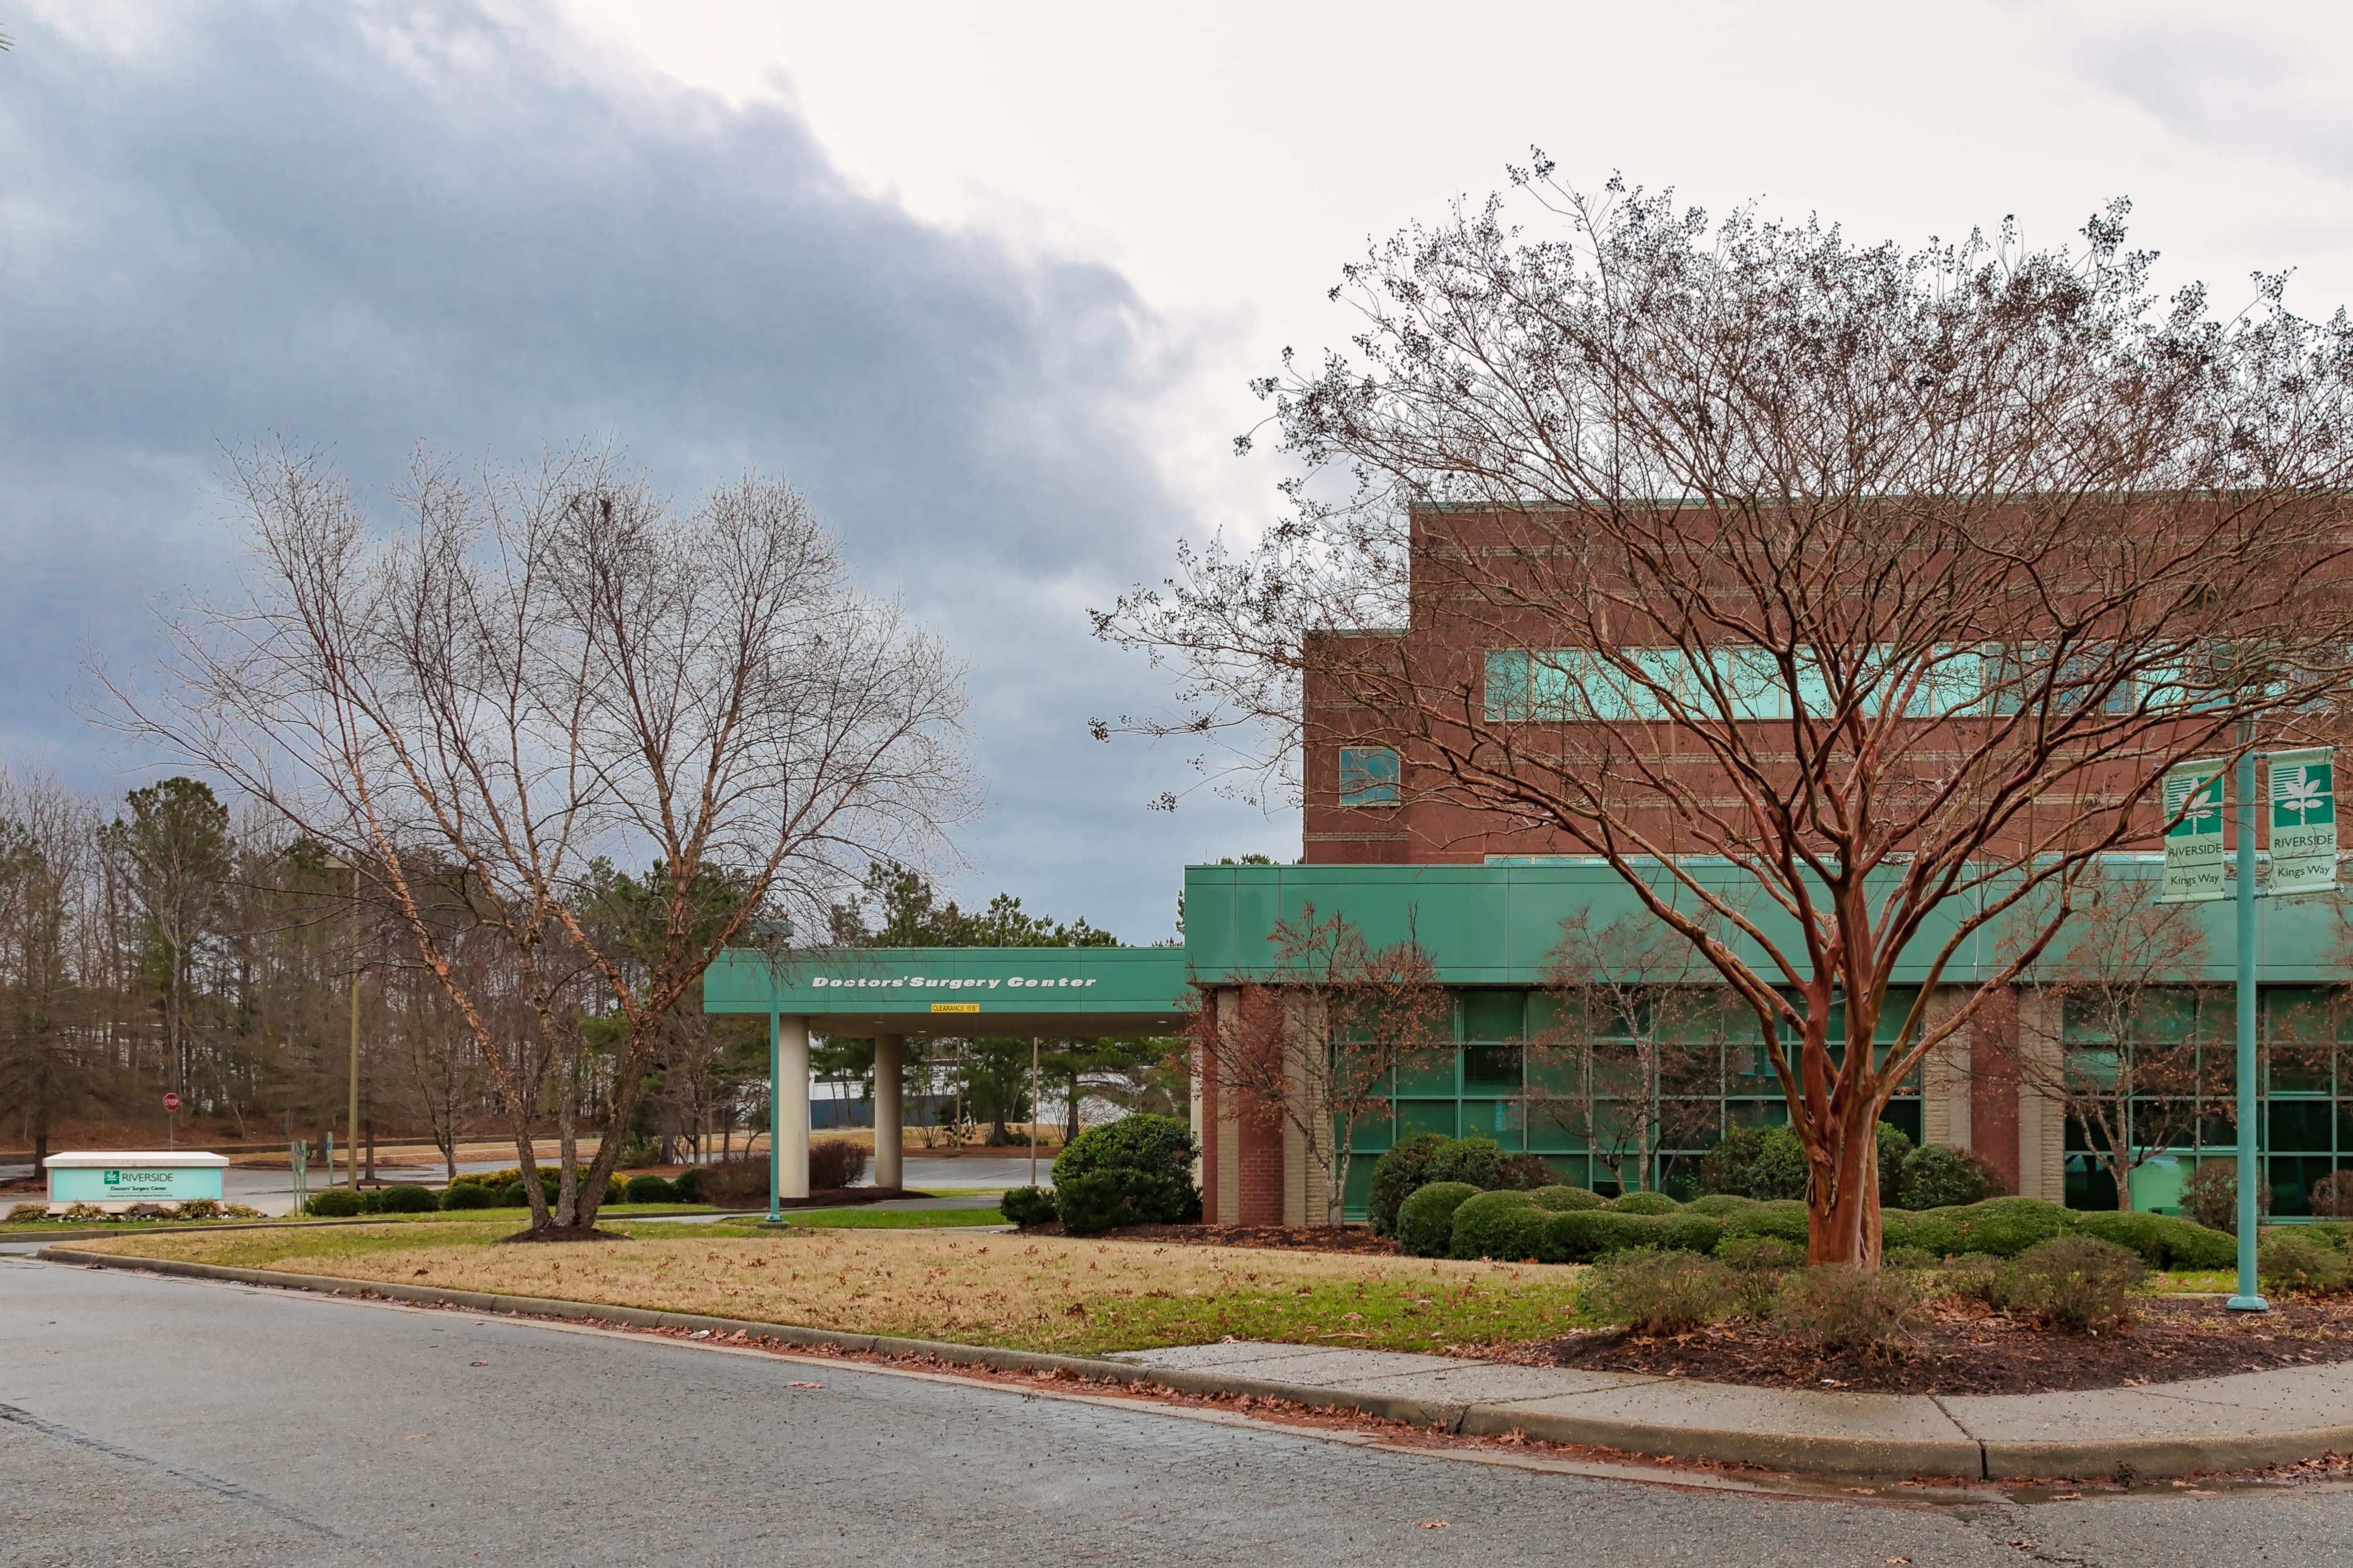 Exterior view of Doctors' Surgery Center